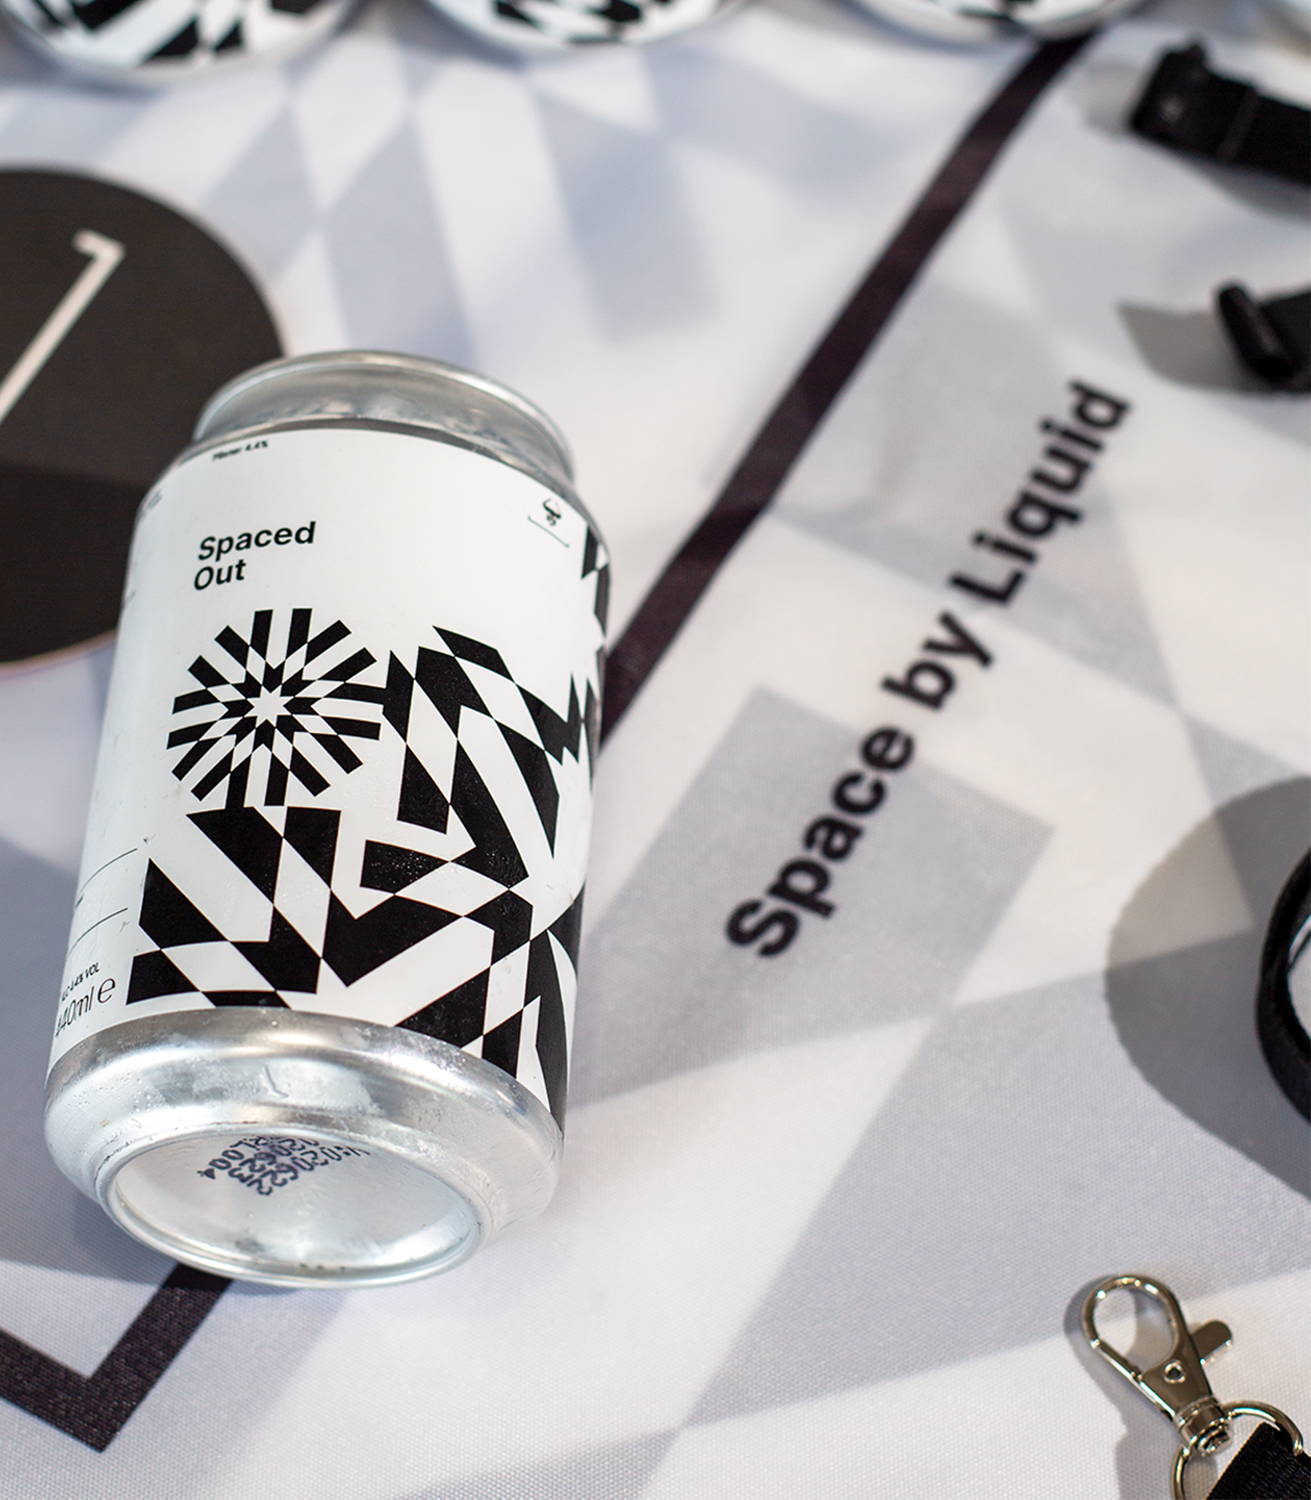 Spaced Out! Space Liverpool bespoke beer